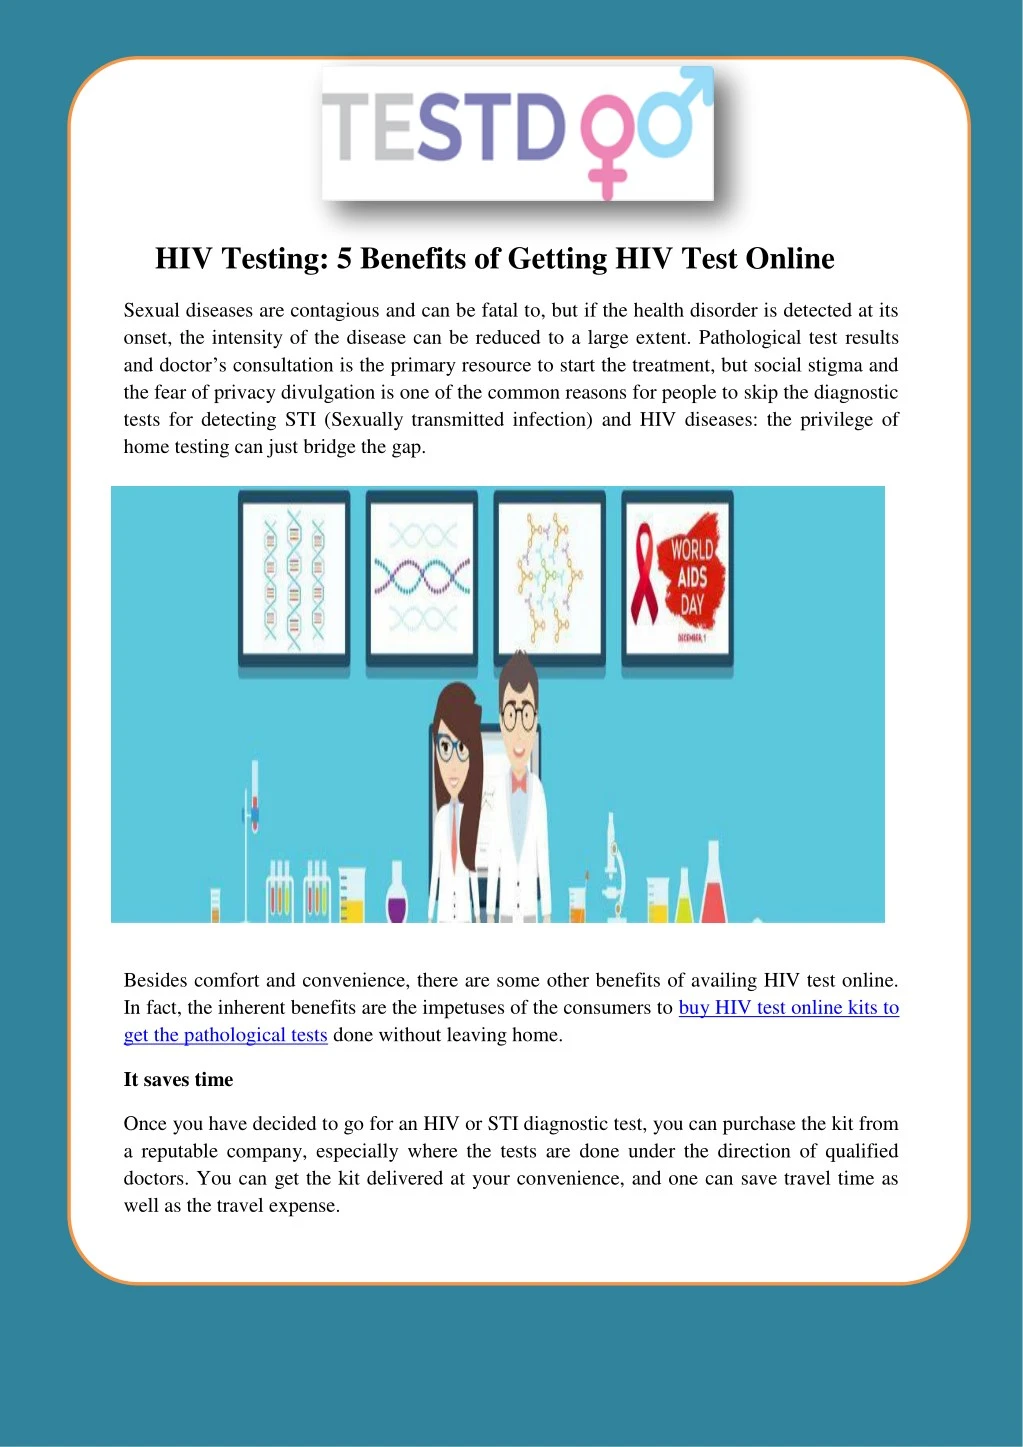 hiv testing 5 benefits of getting hiv test online